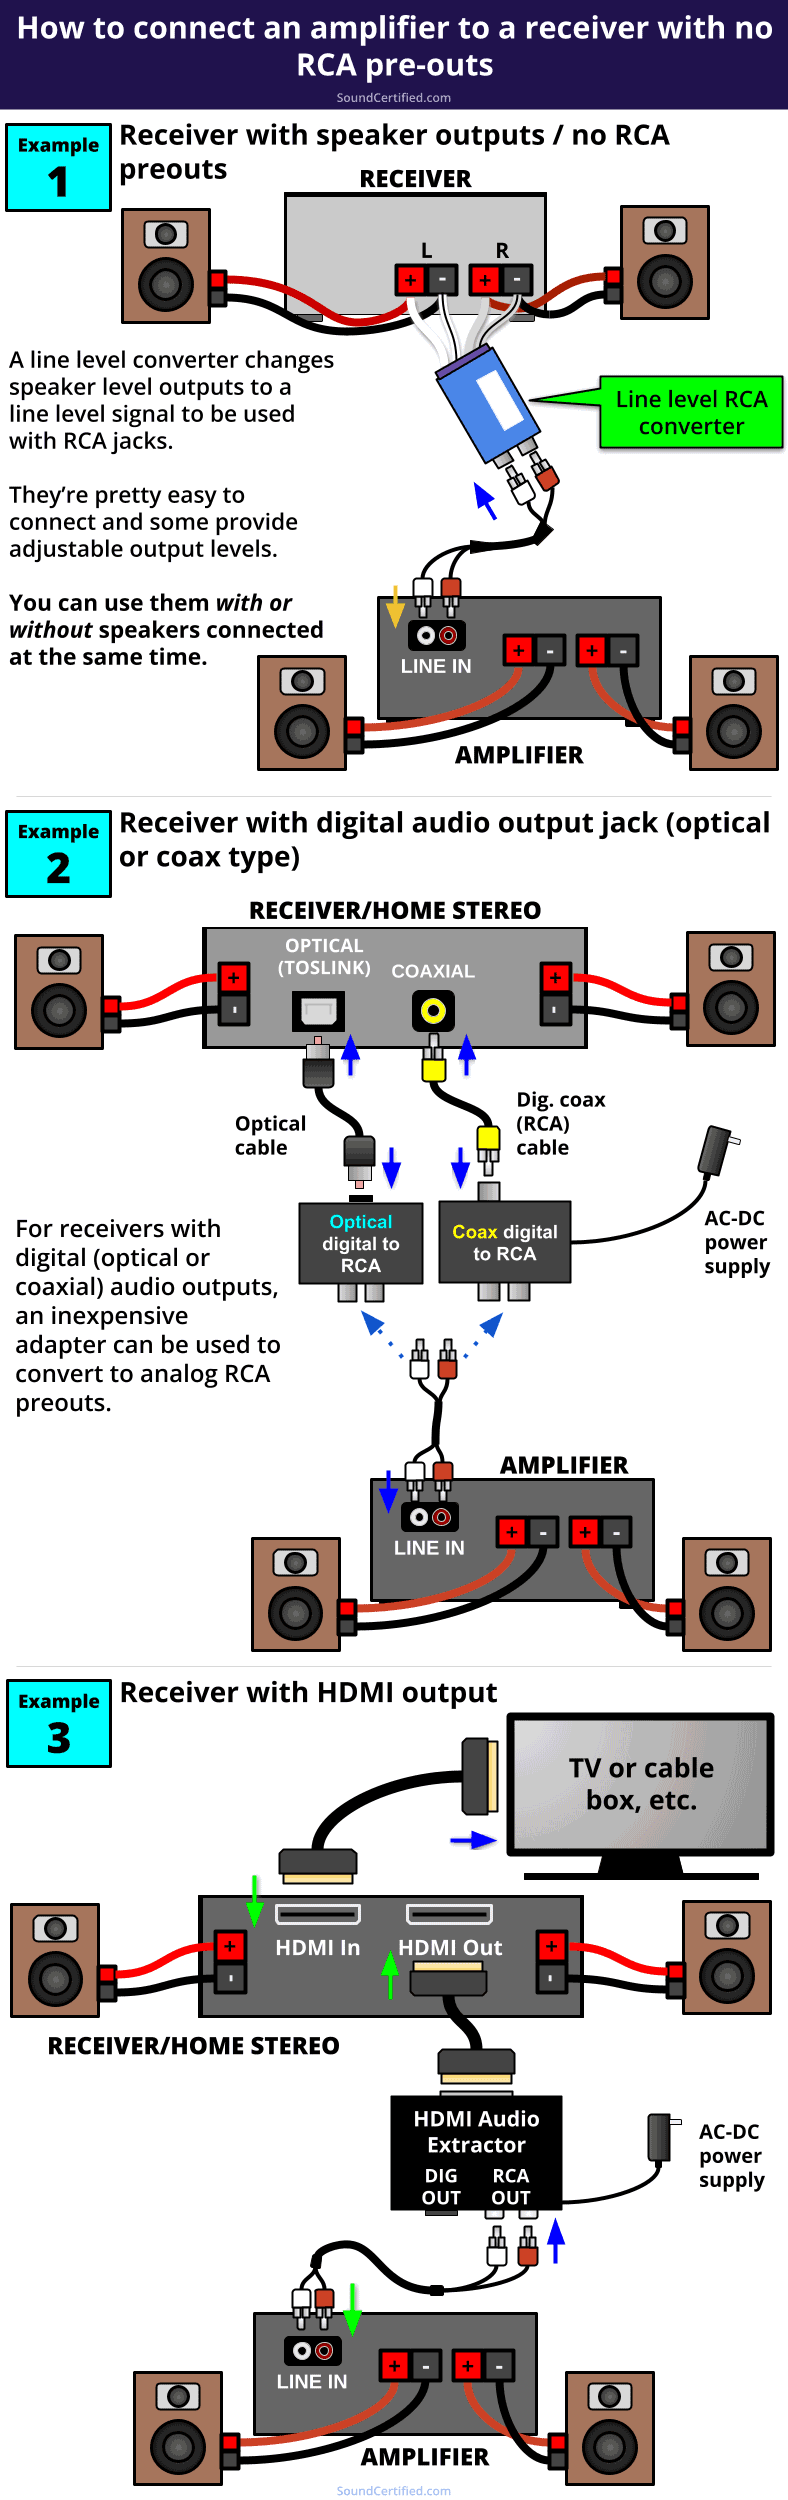 how to connect amplifier to receiver with no preouts diagram